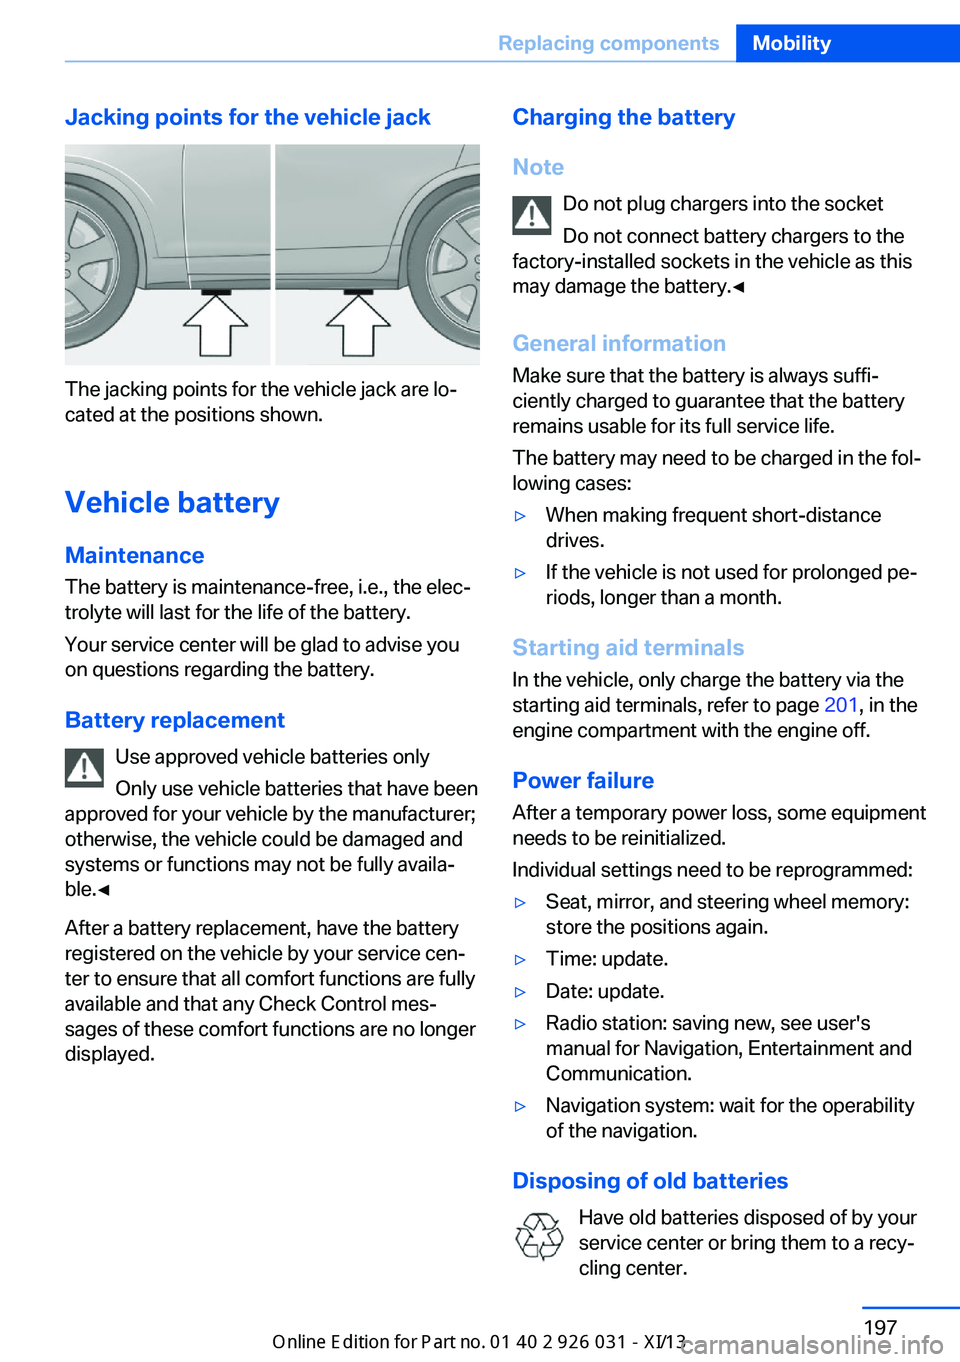 BMW M5 SEDAN 2013  Owners Manual Jacking points for the vehicle jack
The jacking points for the vehicle jack are lo‐
cated at the positions shown.
Vehicle battery Maintenance
The battery is maintenance-free, i.e., the elec‐
troly